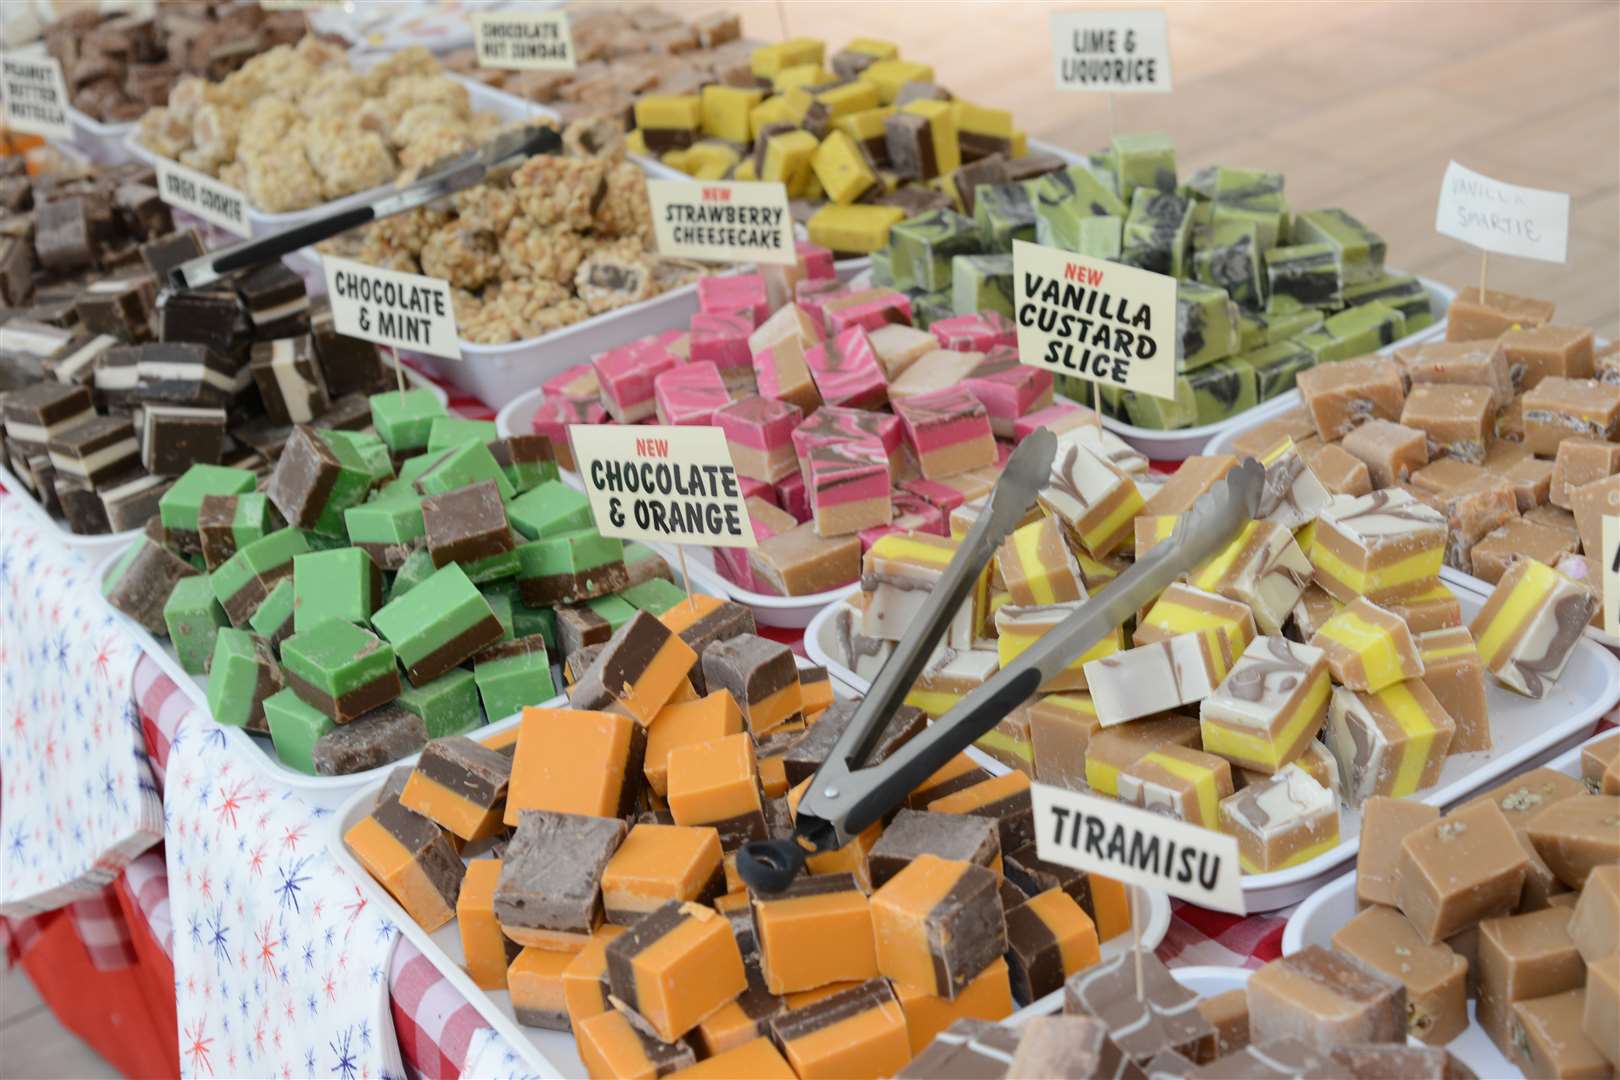 Food producers in Kent can get help to export their products, as well as selling them at events like the County Square Food and Drink festival in Ashford